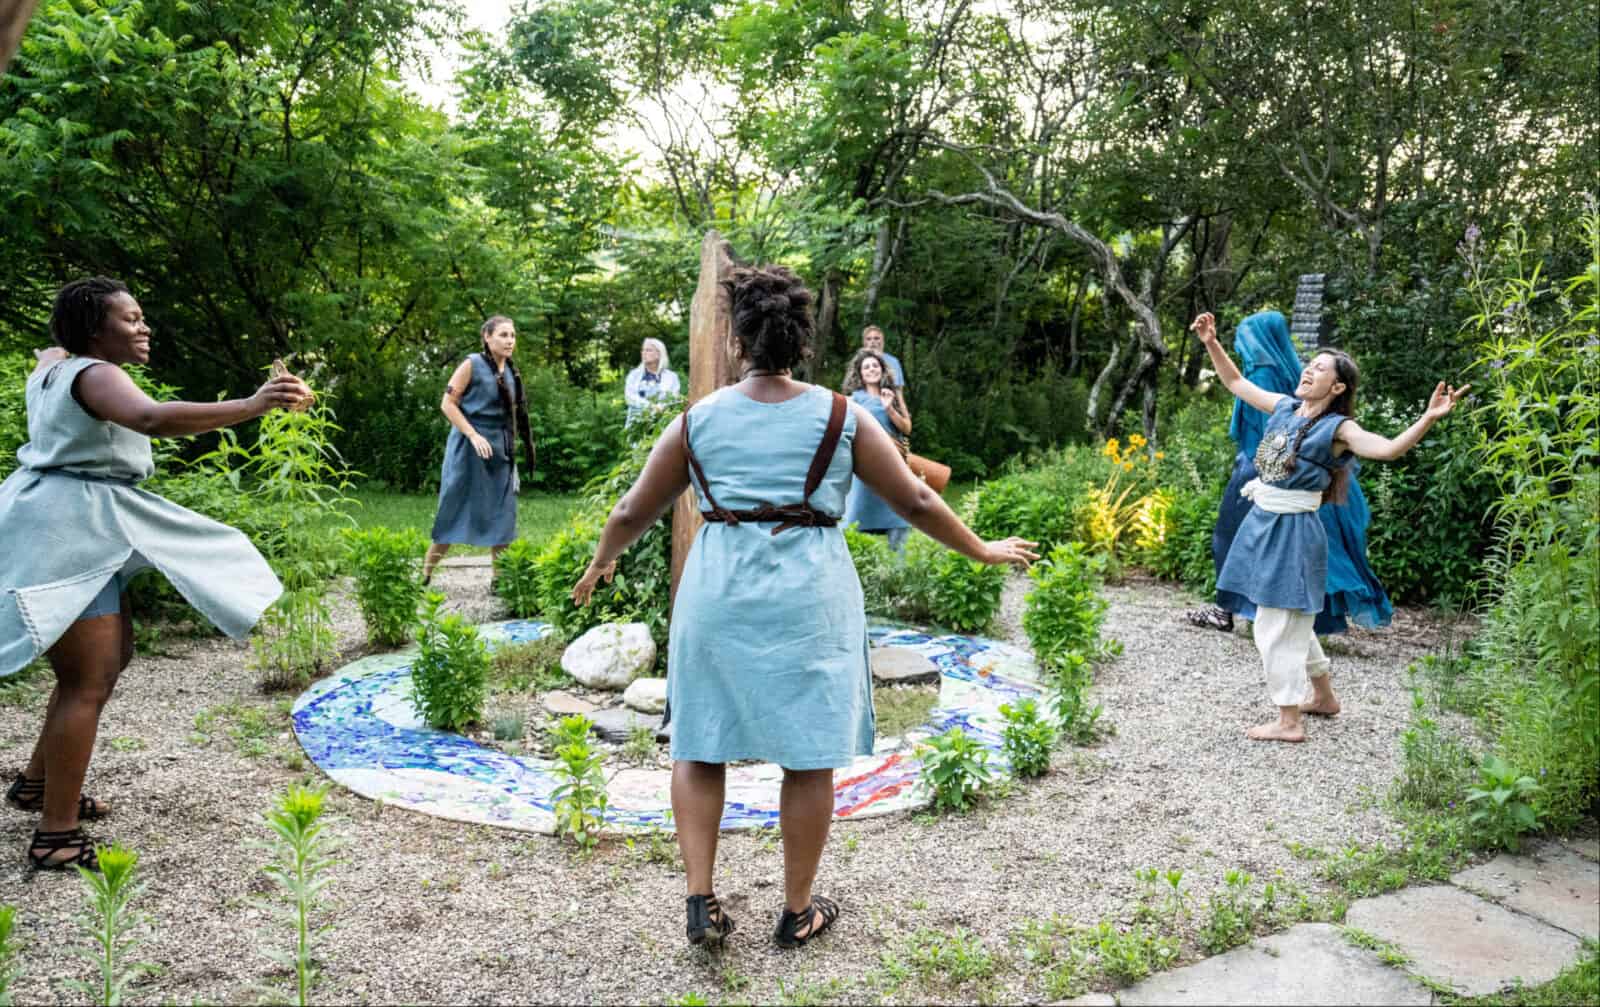 The Bacchae sing and perform in the garden of Semele at Double Edge Theatre. Press photo courtesy of the theatre